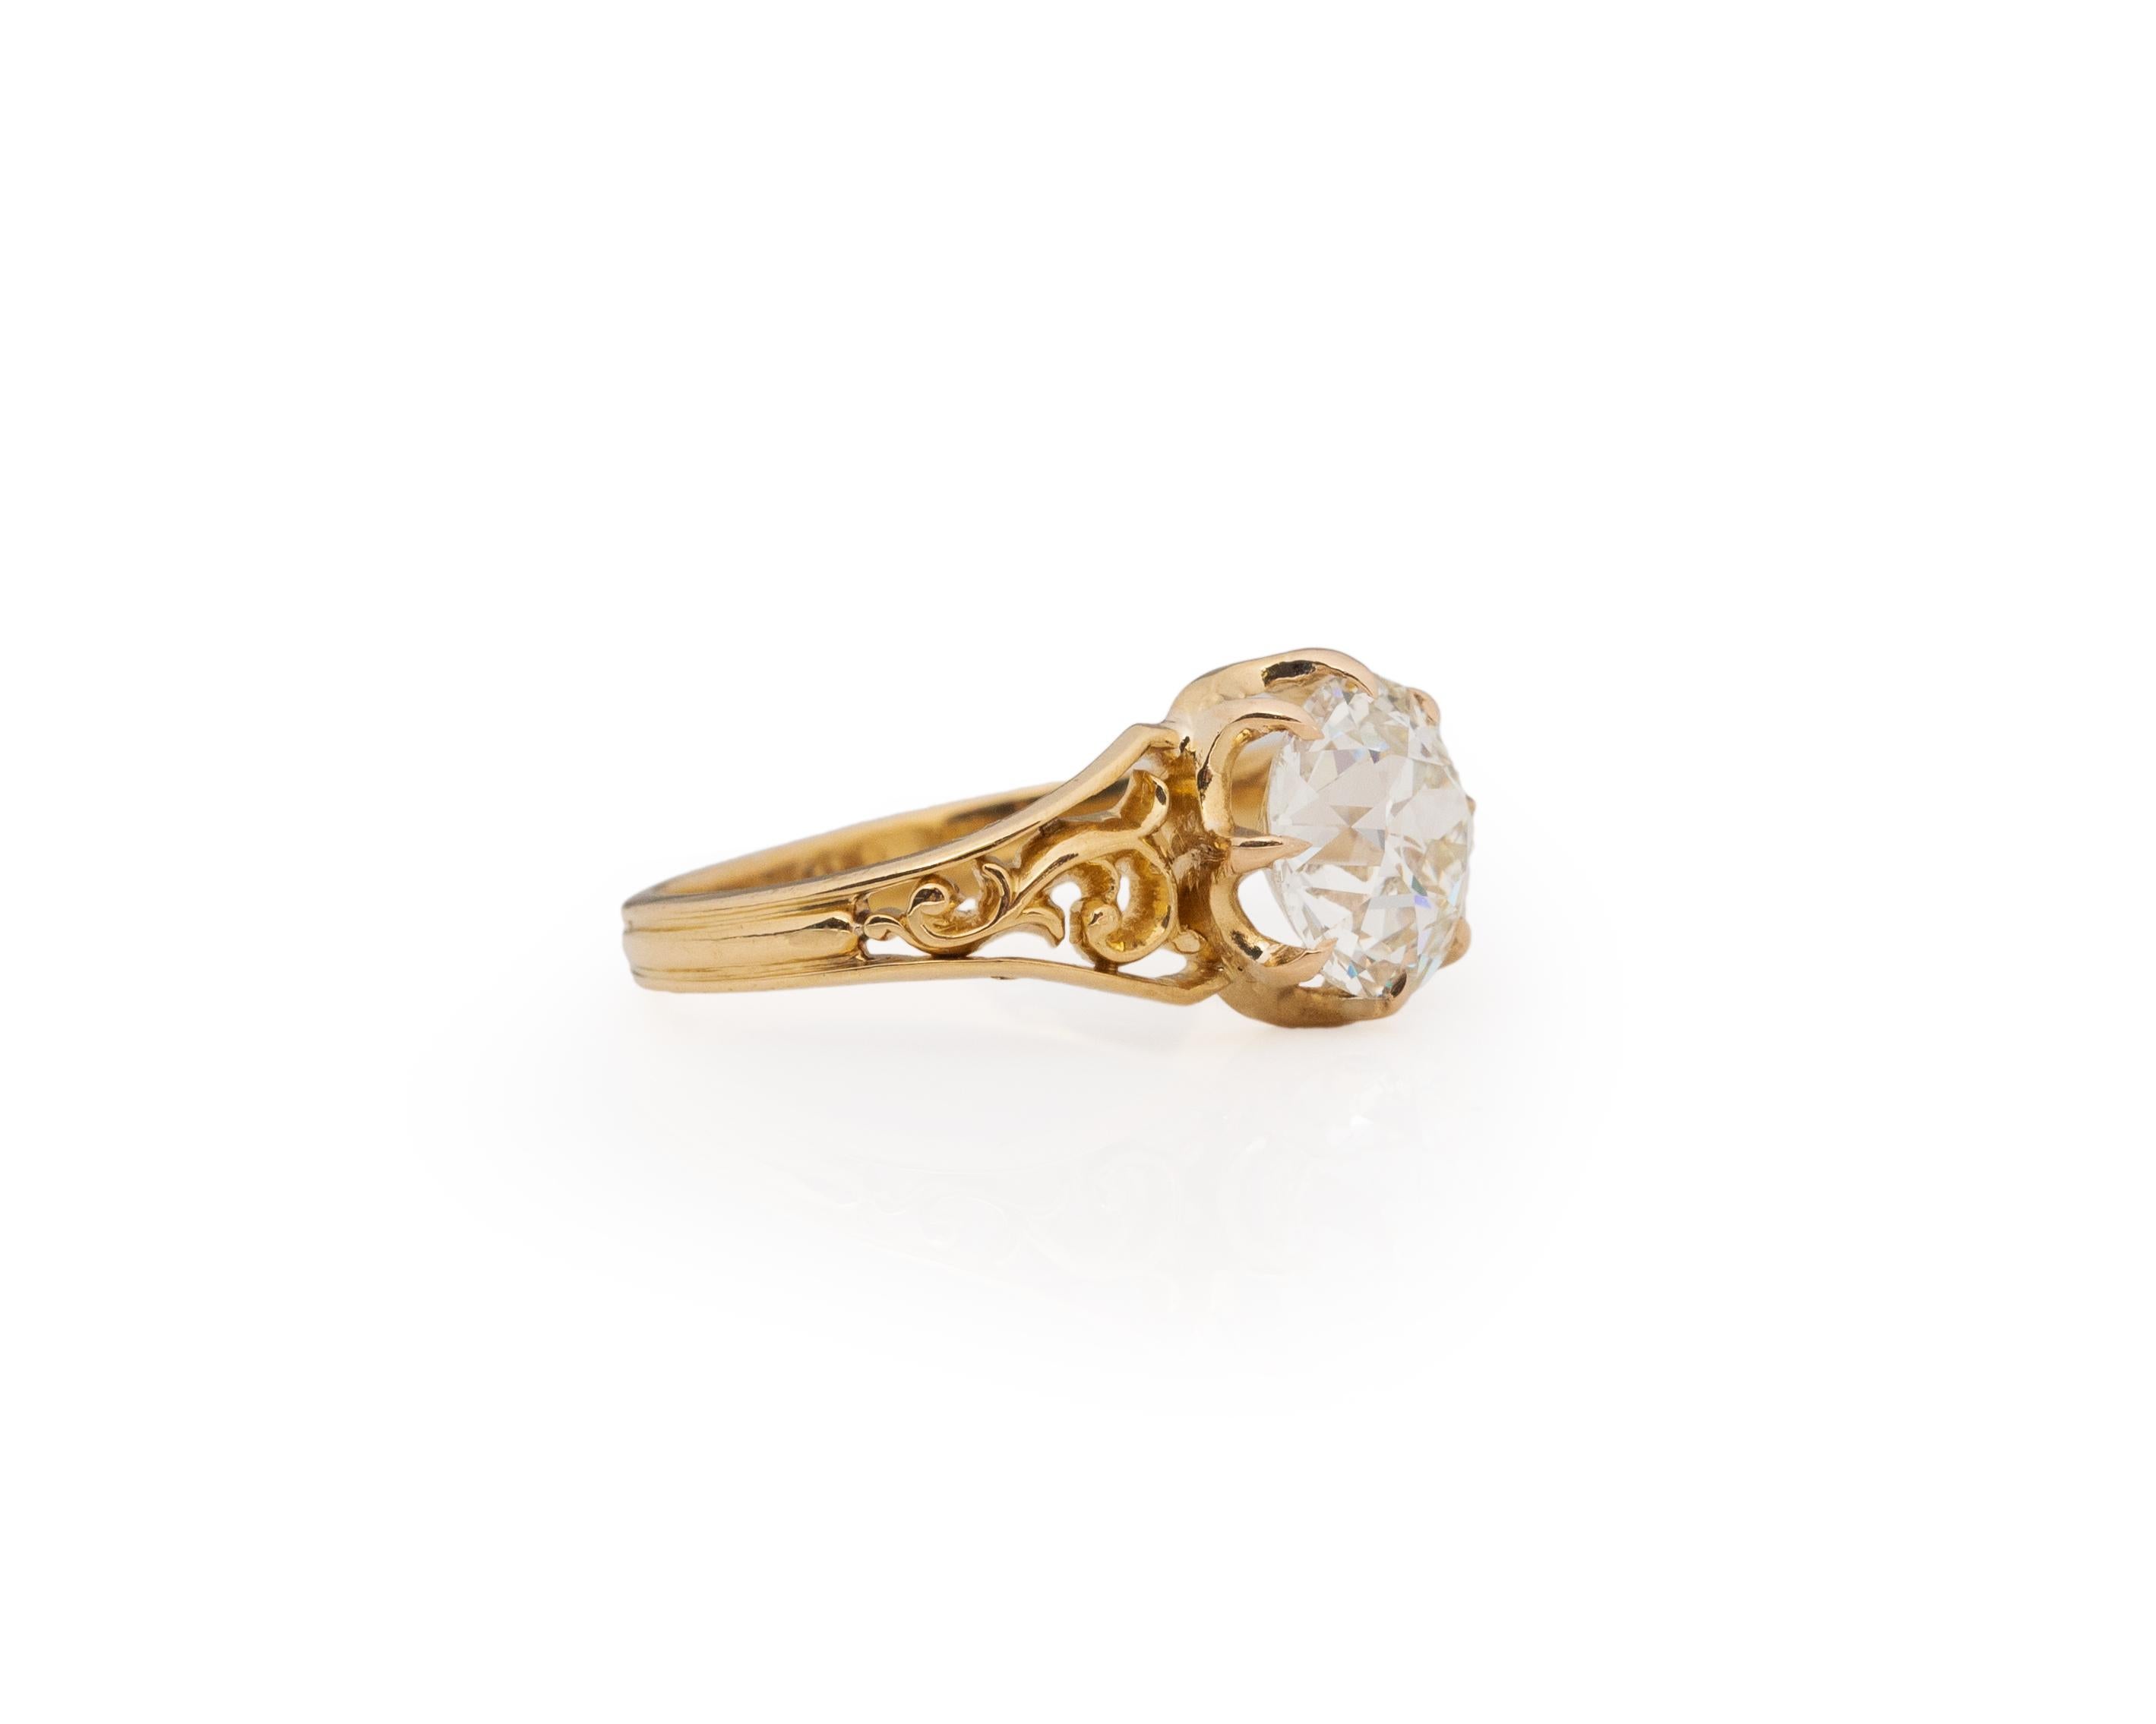 Ring Size: 6.75
Metal Type: 14K Yellow Gold [Hallmarked, and Tested]
Weight: 3.7 grams

Center Diamond Details:
GIA REPORT #:6224538814
Weight: 2.31ct
Cut: Old European brilliant
Color: K
Clarity: VS2
Measurements: 8.46mm x 8.29mm x 5.37mm

Finger